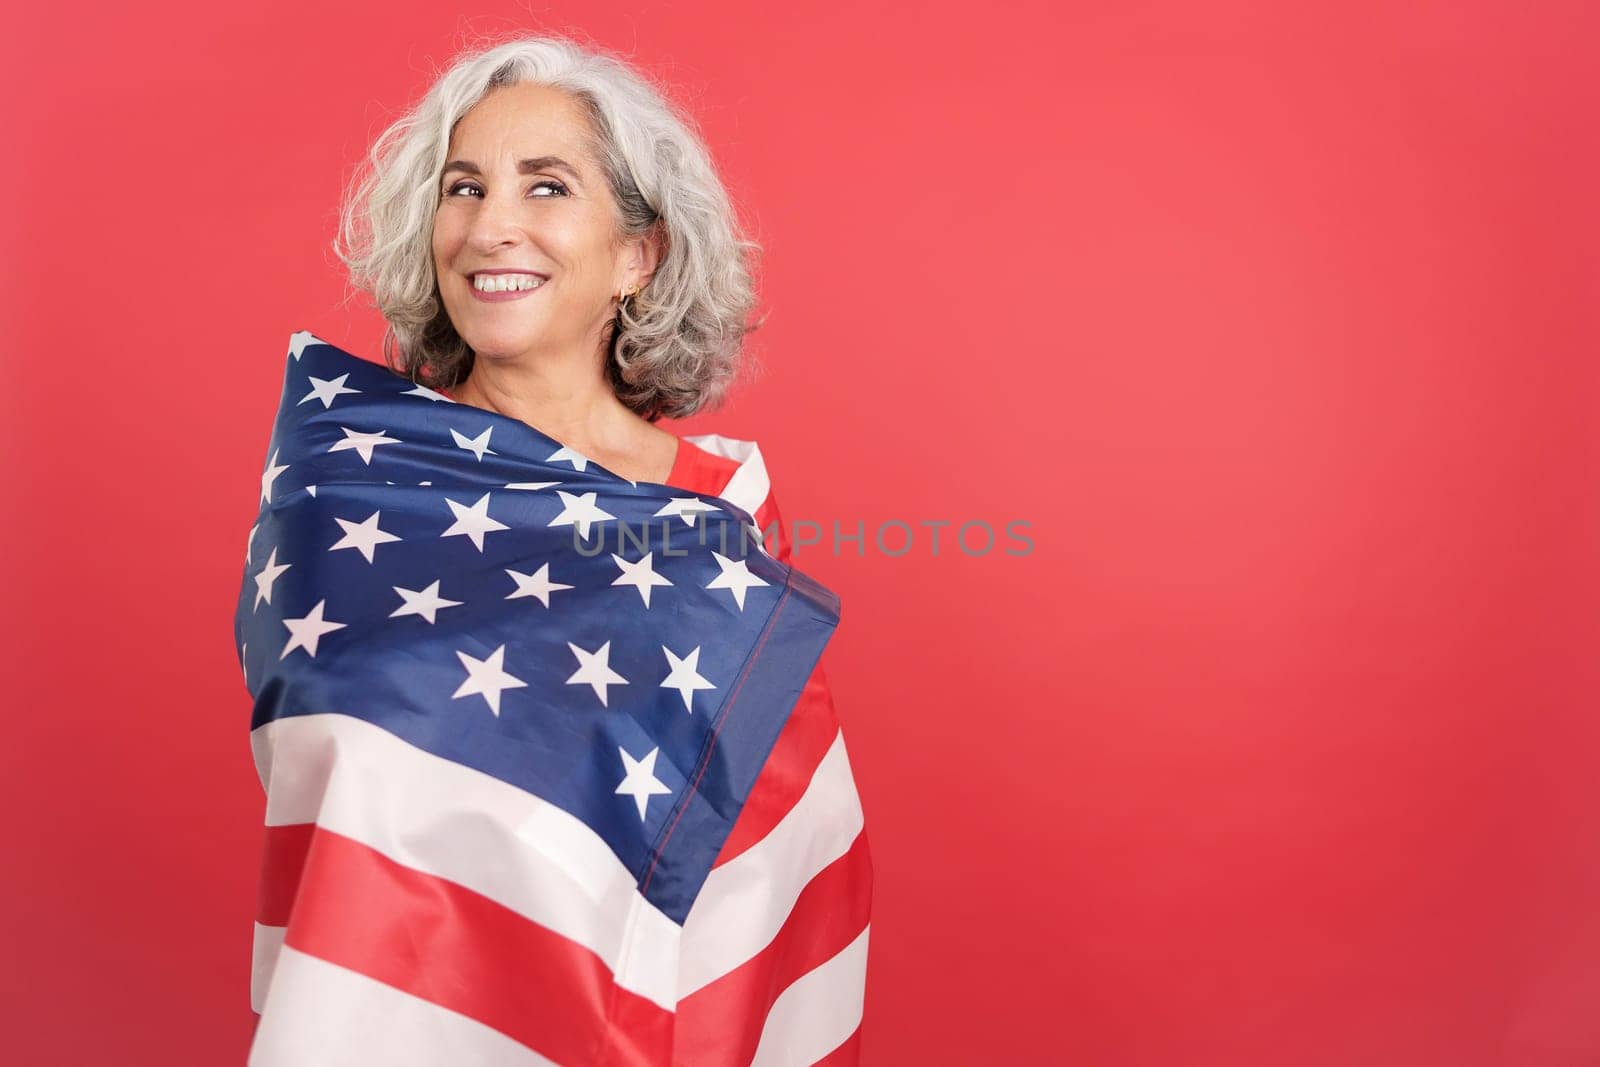 Studio portrait with red background of a happy woman wrapping with a north america national flag